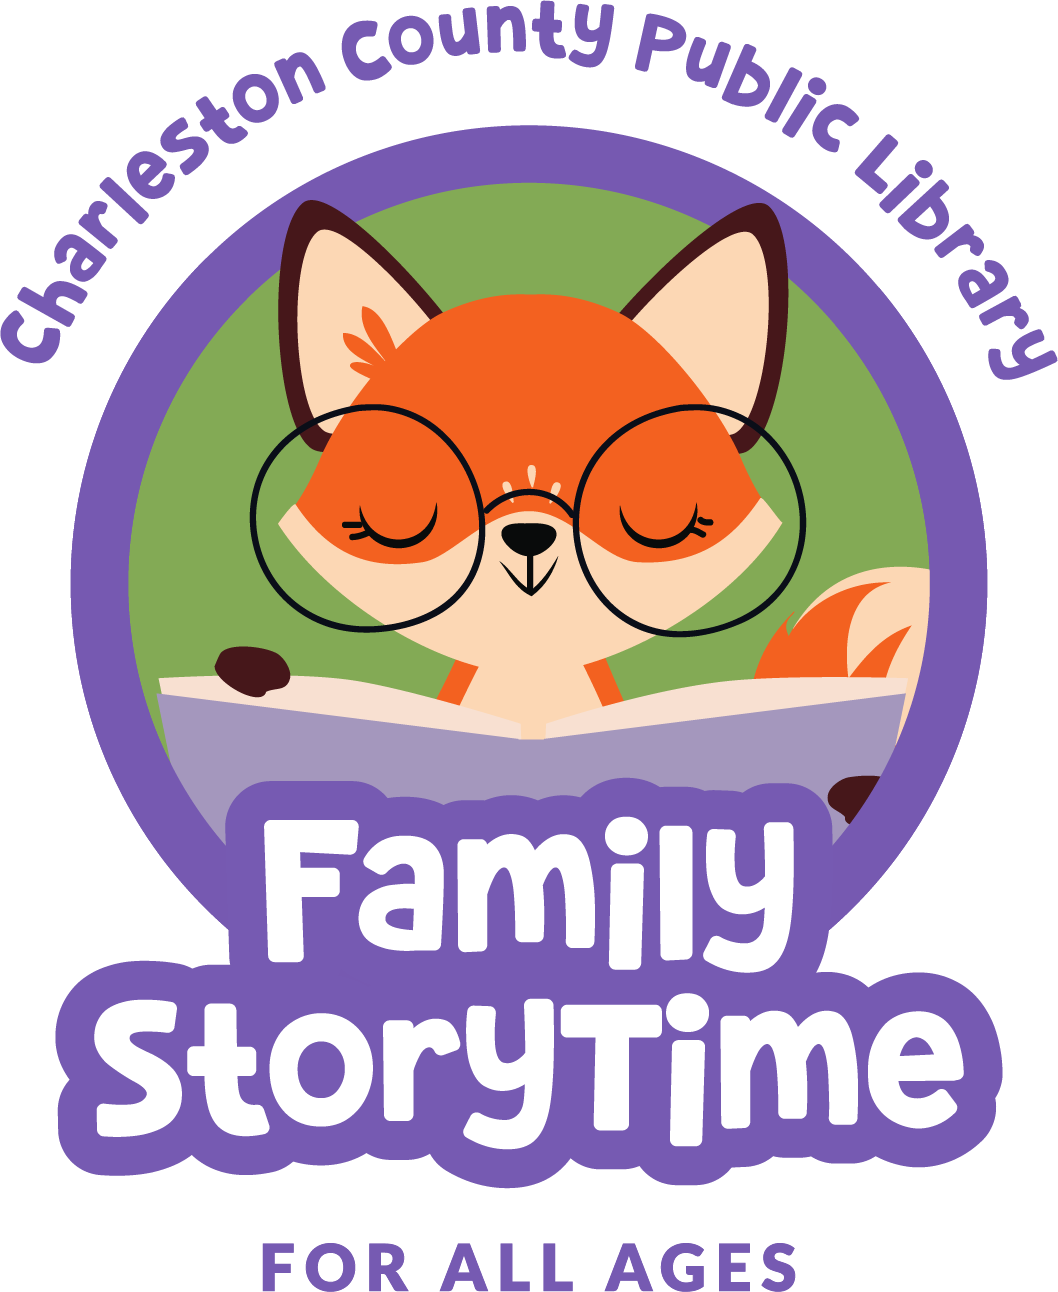 Family Storytime at Dorchester Road Library